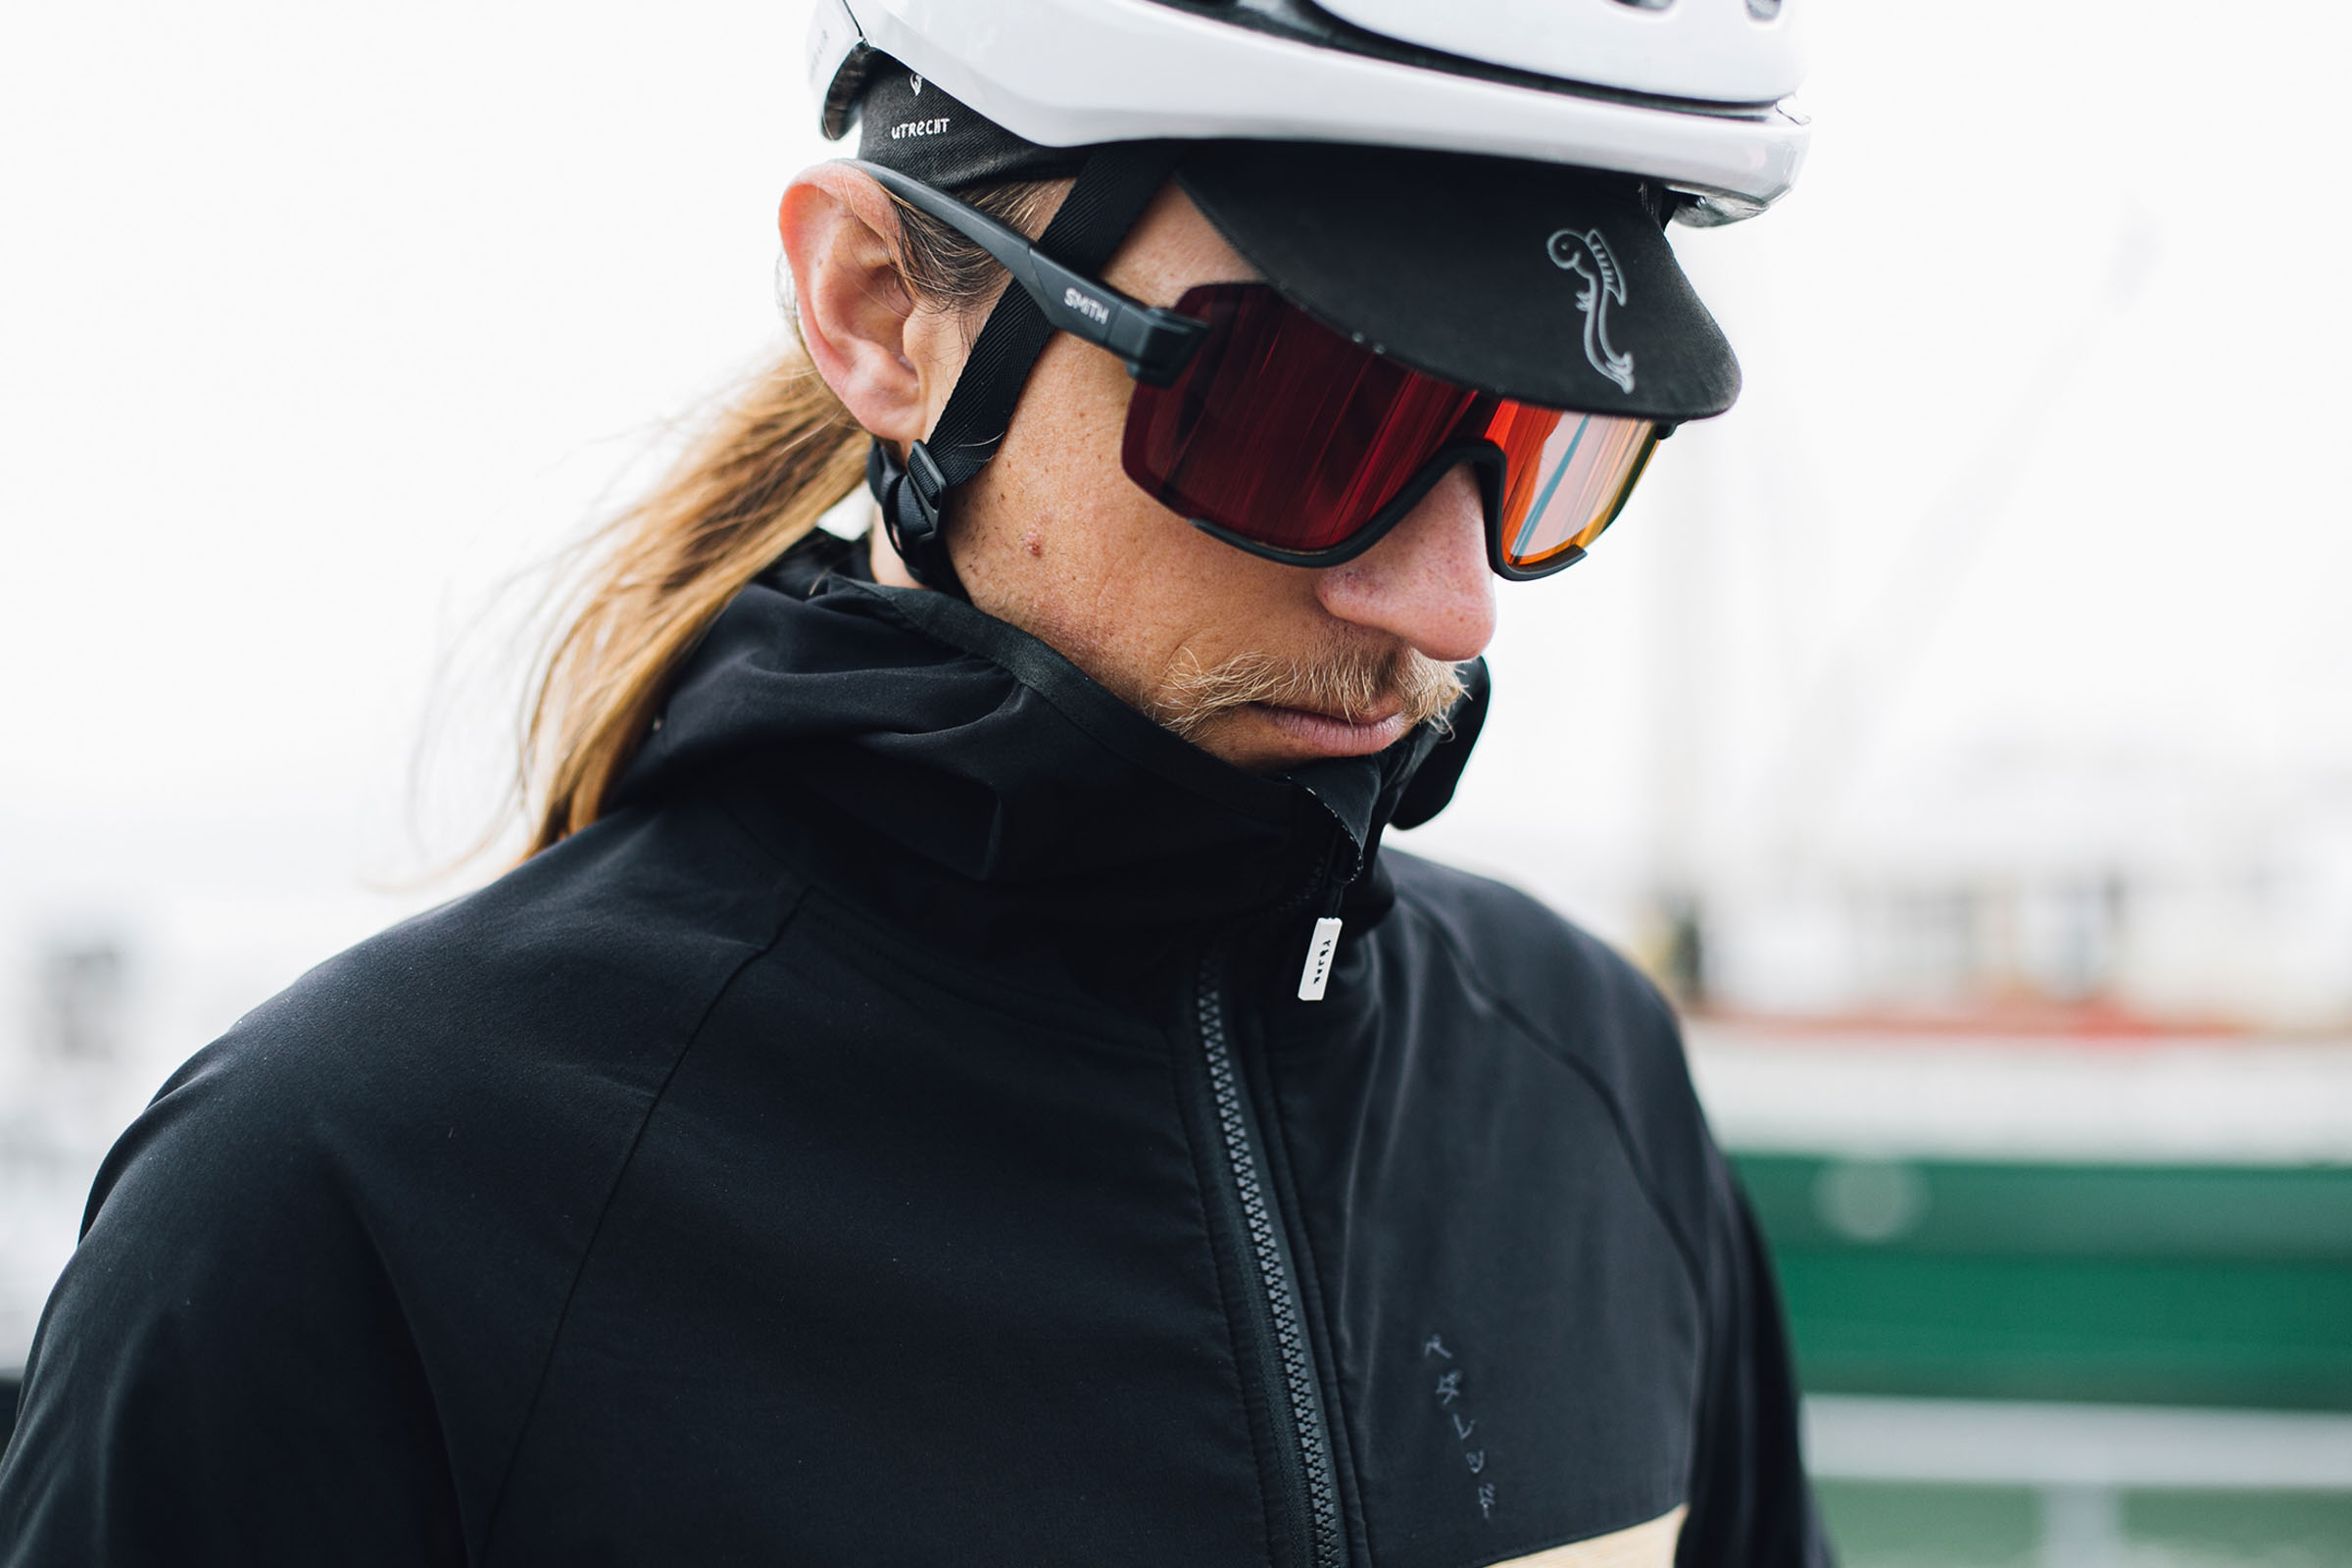 PEdALED's new Jary All-Road Merino Hooded Jersey - BIKEPACKING.com